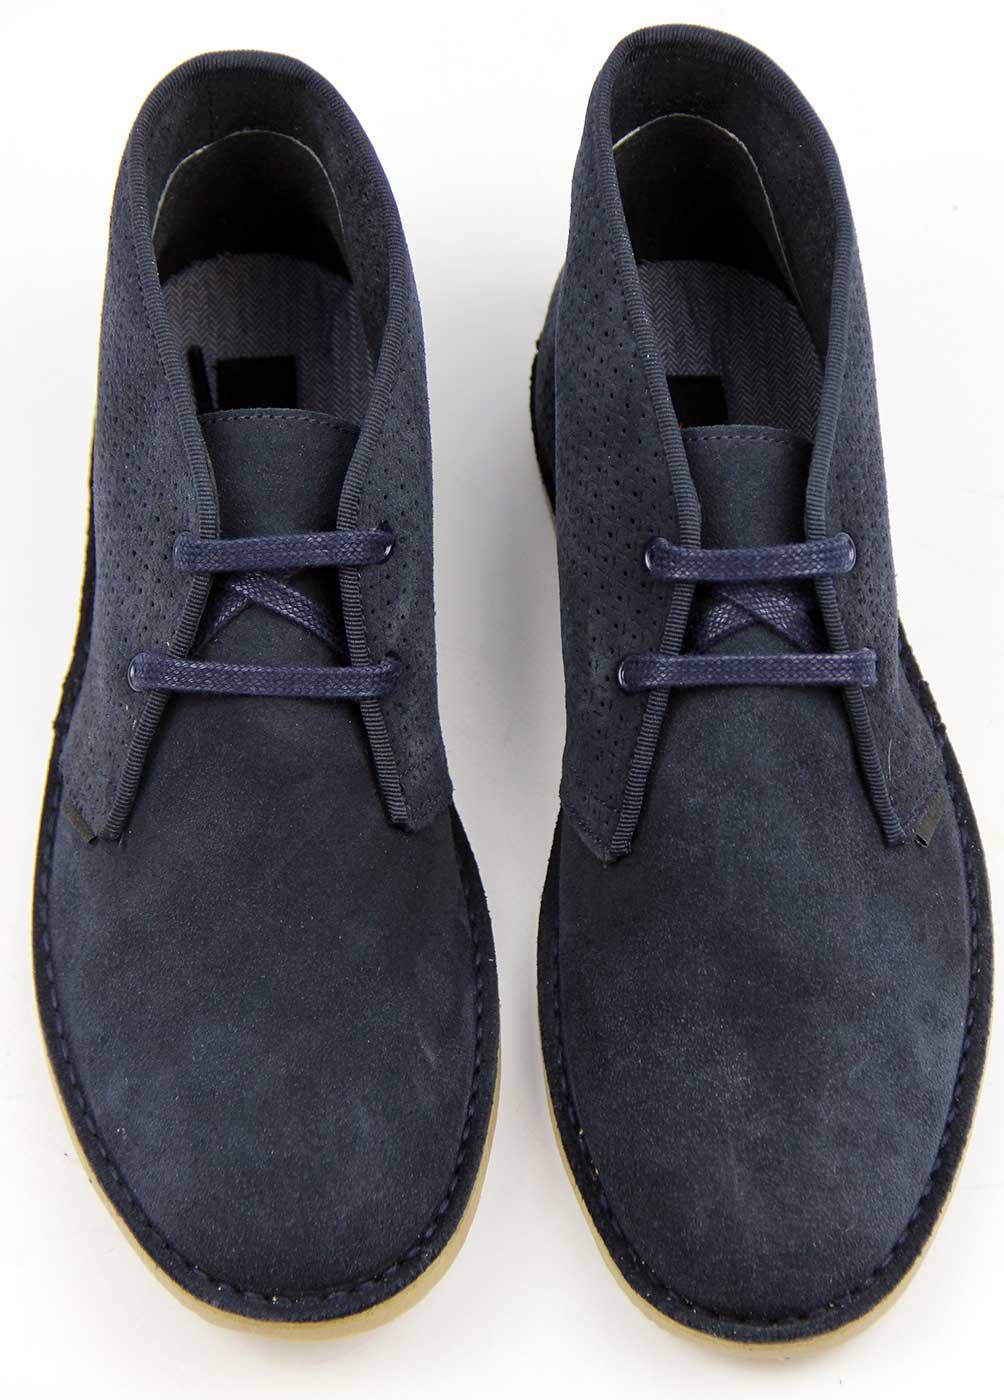 BEN SHERMAN Retro Sixties Mod Punched Suede Desert Boots Navy